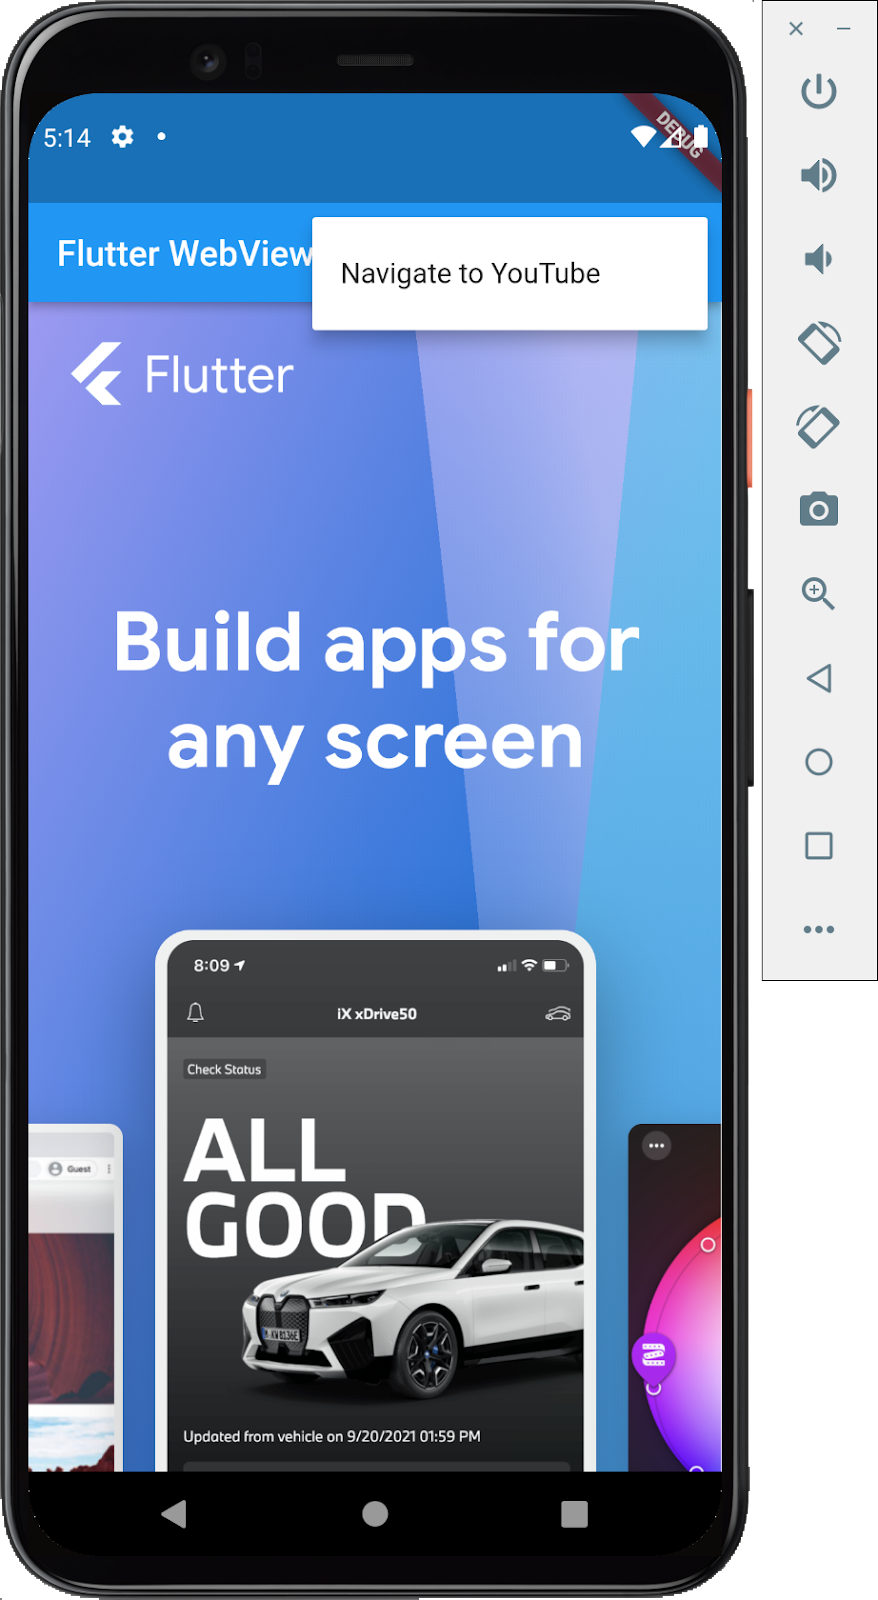 A screen shot of an Android emulator running a Flutter app with an embedded webview showing the Flutter.dev homepage with a menu item showing the option to 'Navigate to YouTube'